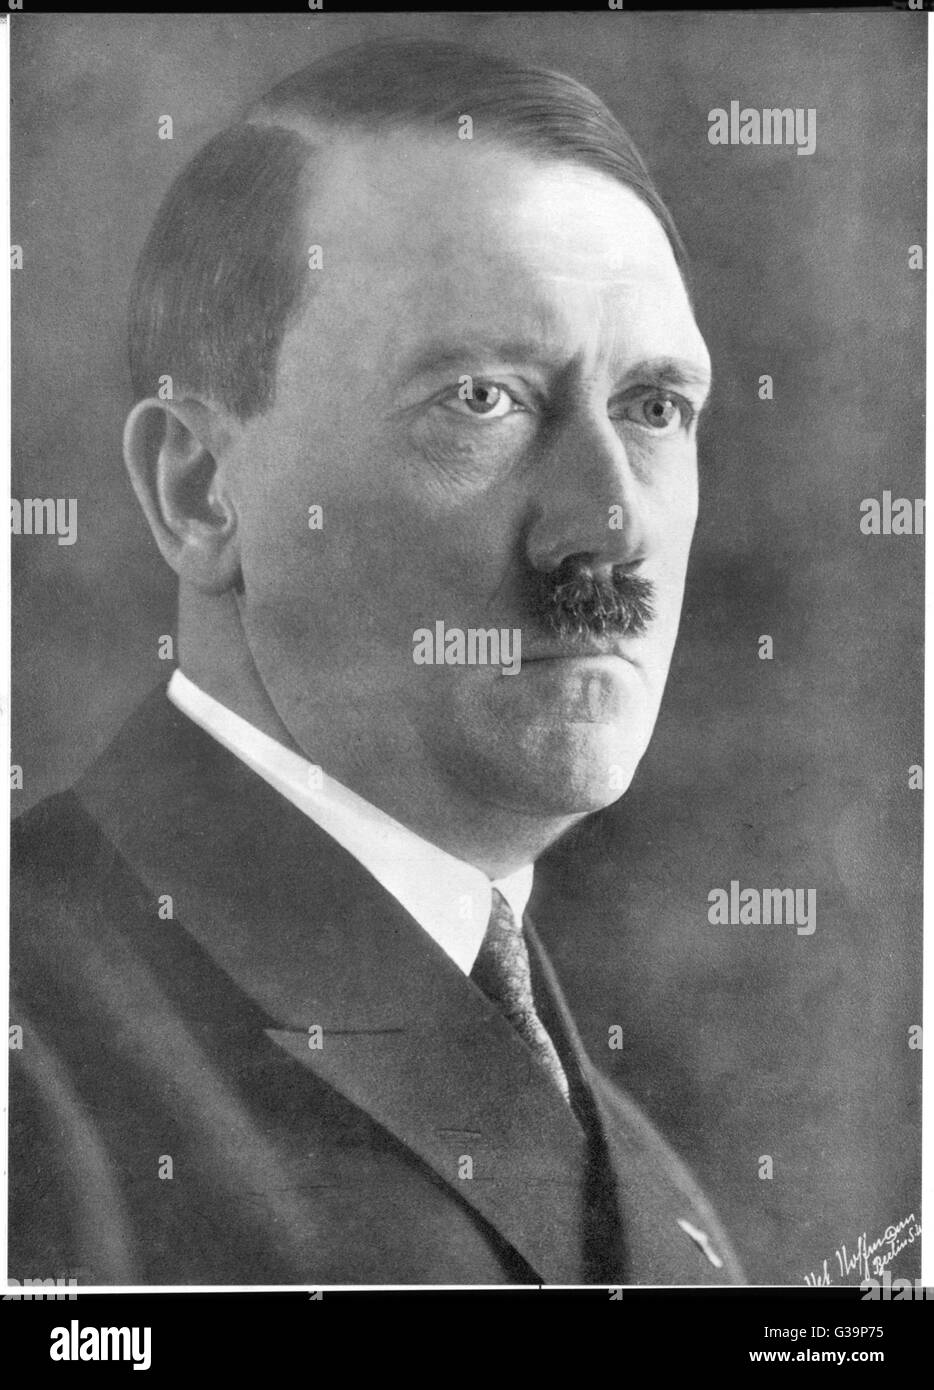 German politician and leader, ADOLF HITLER (1889-1945) .          Date: 1939 Stock Photo